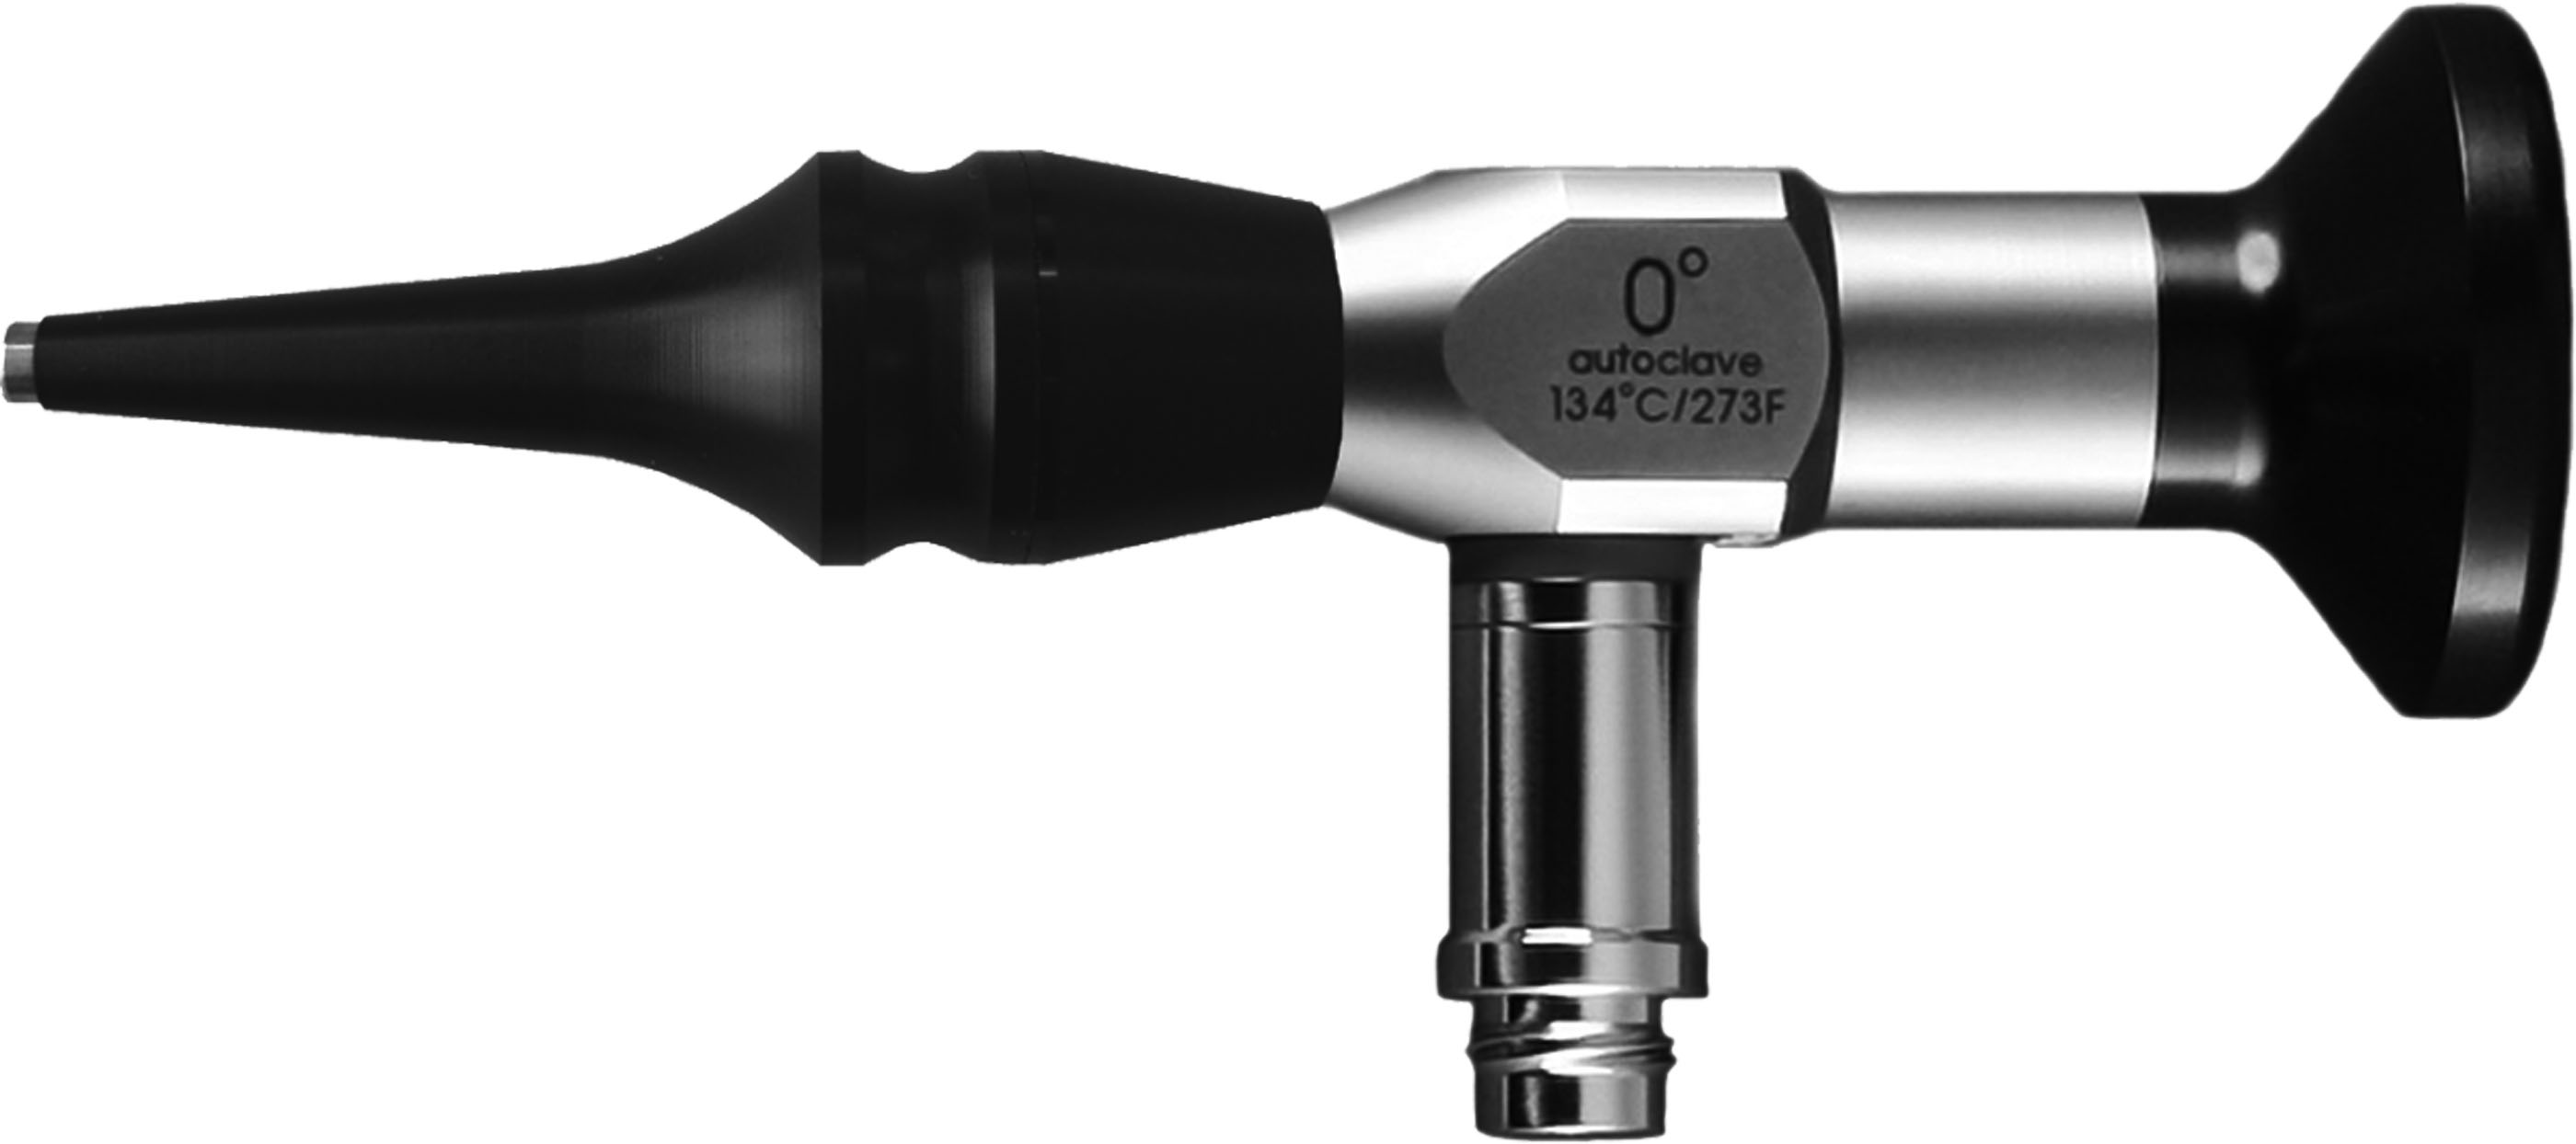 OTOSCOPE WITH SPECULUM Ø 4.0MM, 0°, 50MM WIDE ANGLE, HD SCOPE 